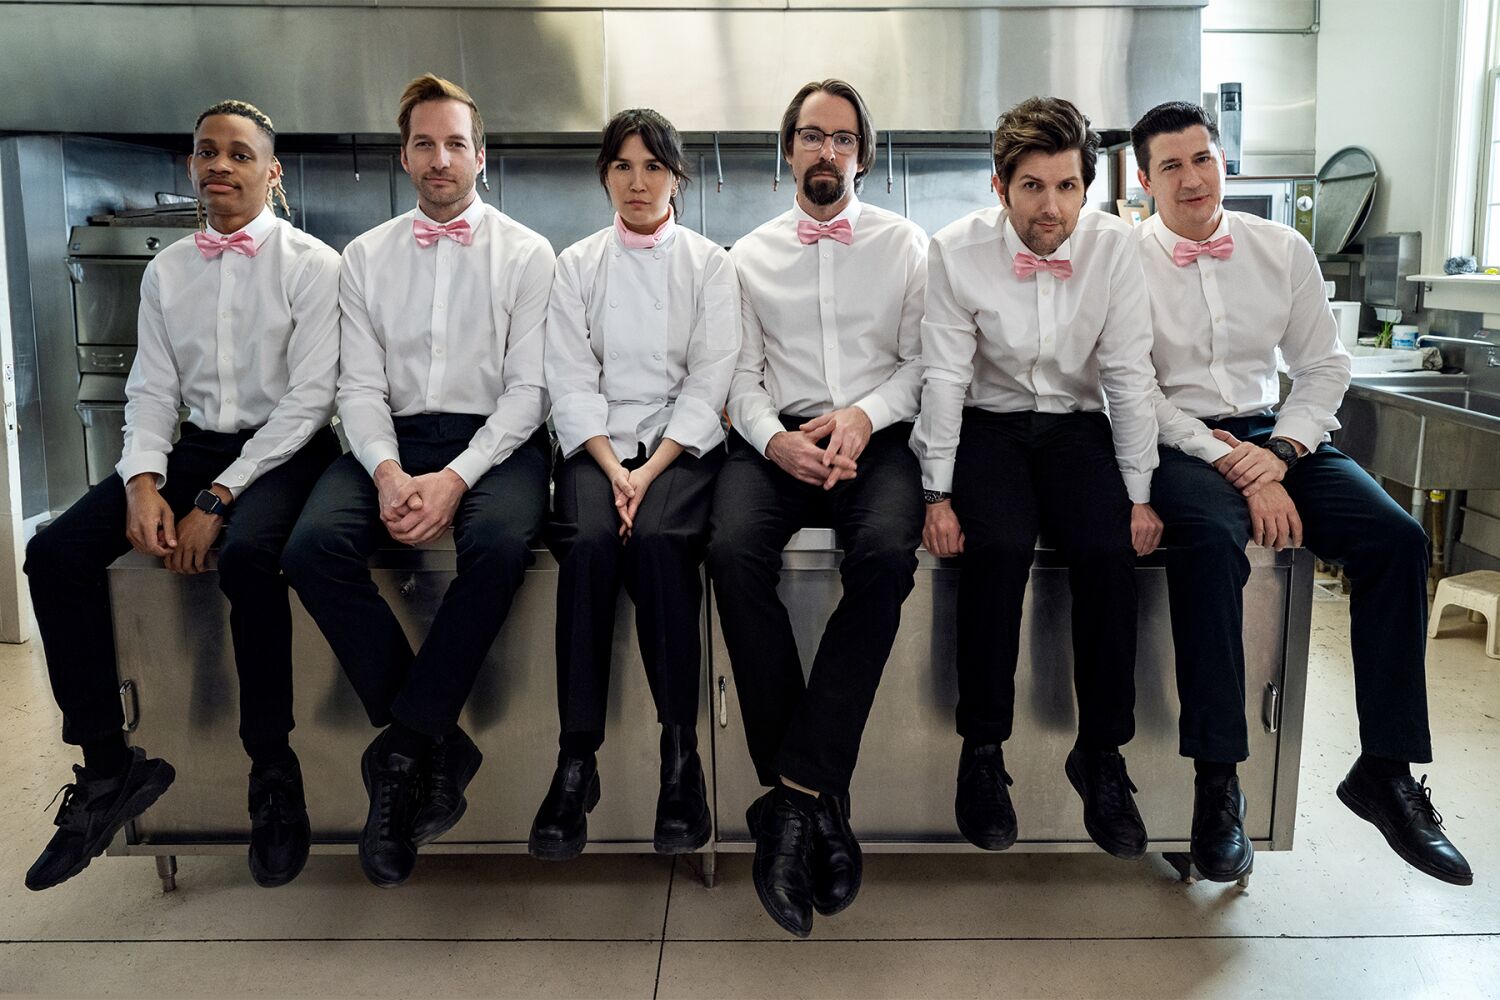 'Party Down' puts its cater-waiters through the wringer. The cast has been there too